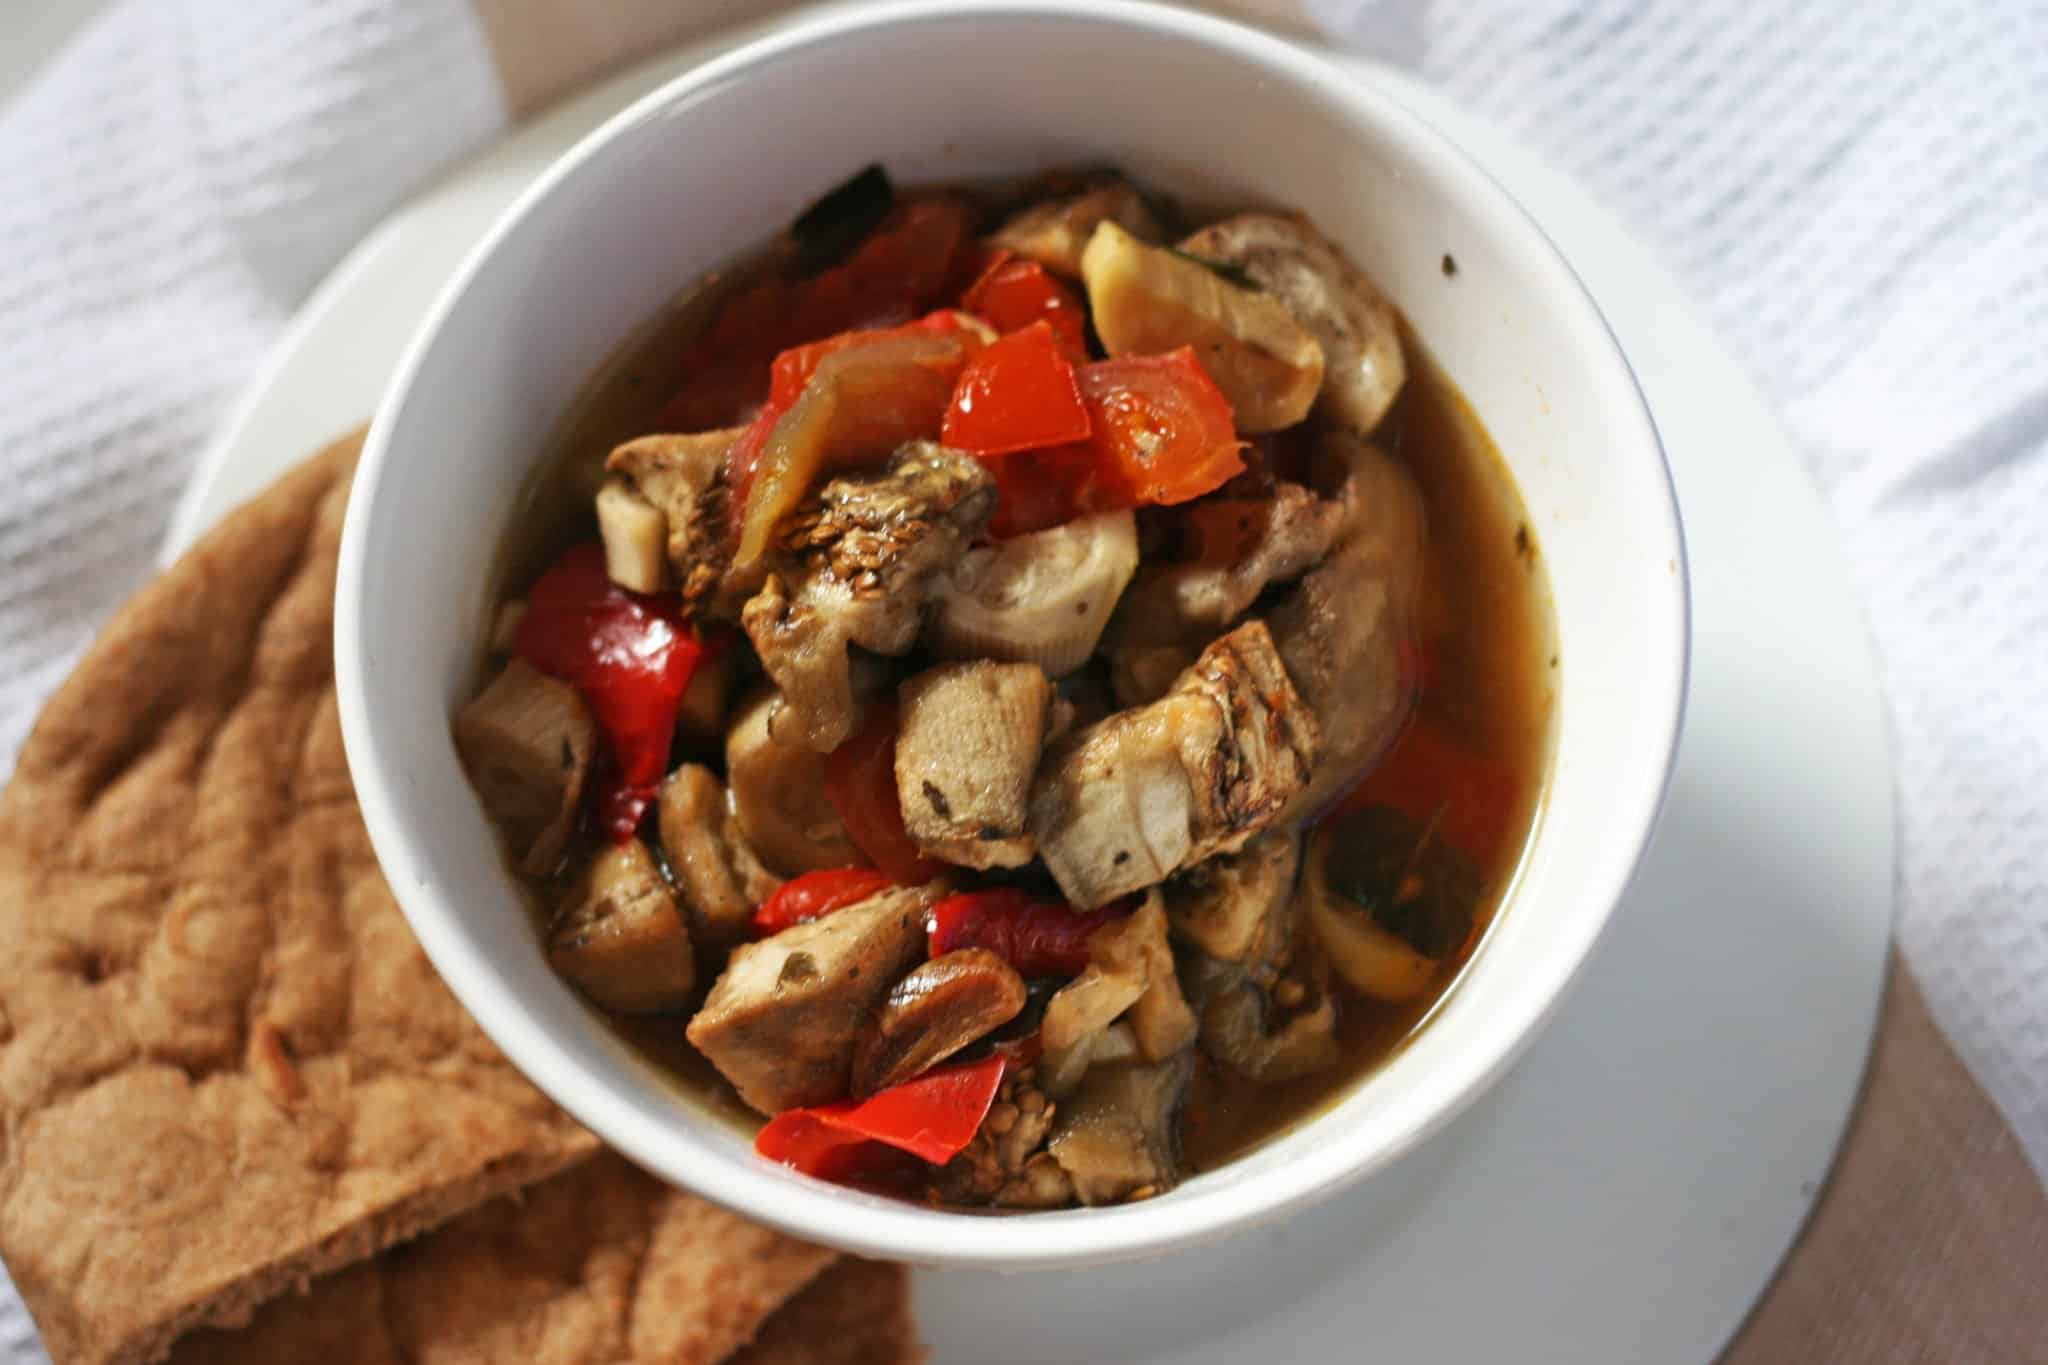 Tender eggplant and peppers slow cooked and served in a white bowl with warm pita bread in a side plate